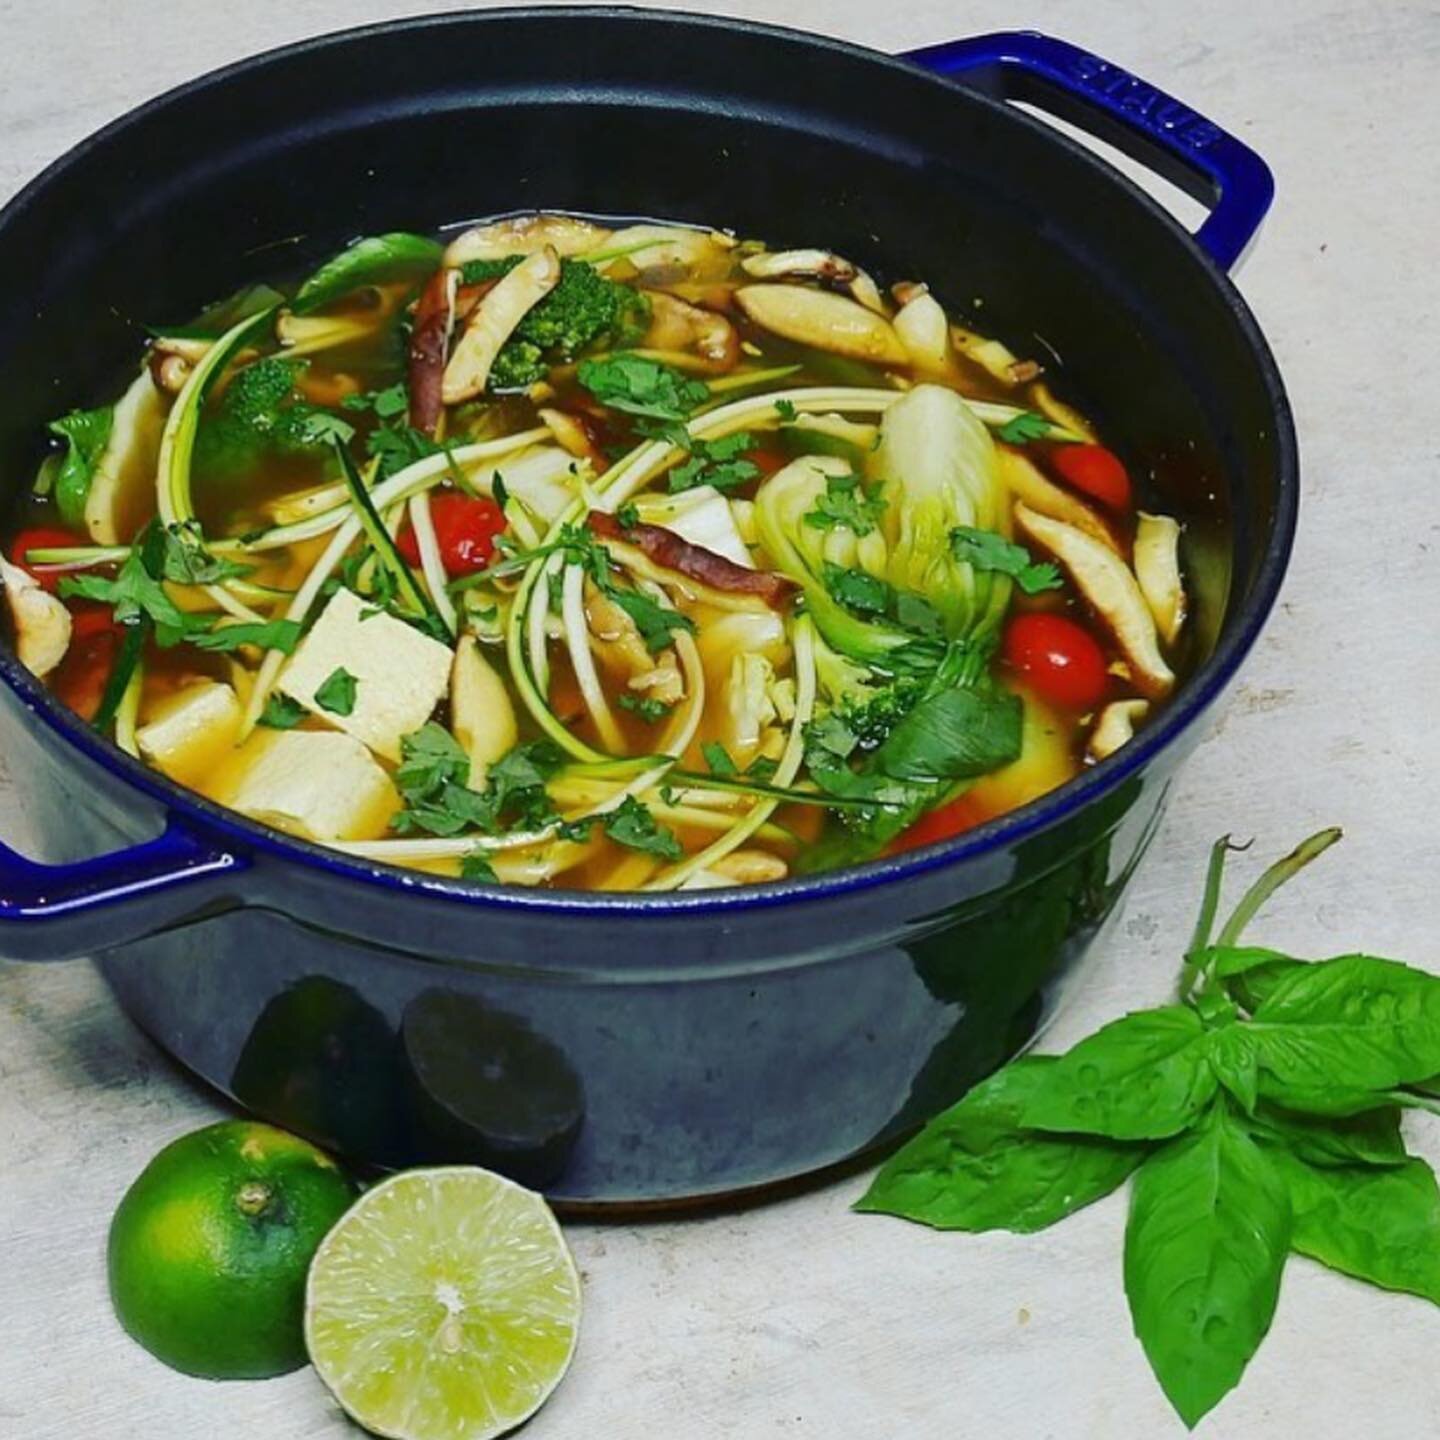 TASTY 😋 THAI TOM YUM SOUP 🍲 

Soup 🍲 season 🍂 has begun and this Vegan News Daily Tom Yum tastes and looks like a delicious 🤤 warm meal that you&rsquo;d order from a restaurant in Thailand. 🍜 

Tom Yum soup 🥣 is a spicy and sour soup that orig